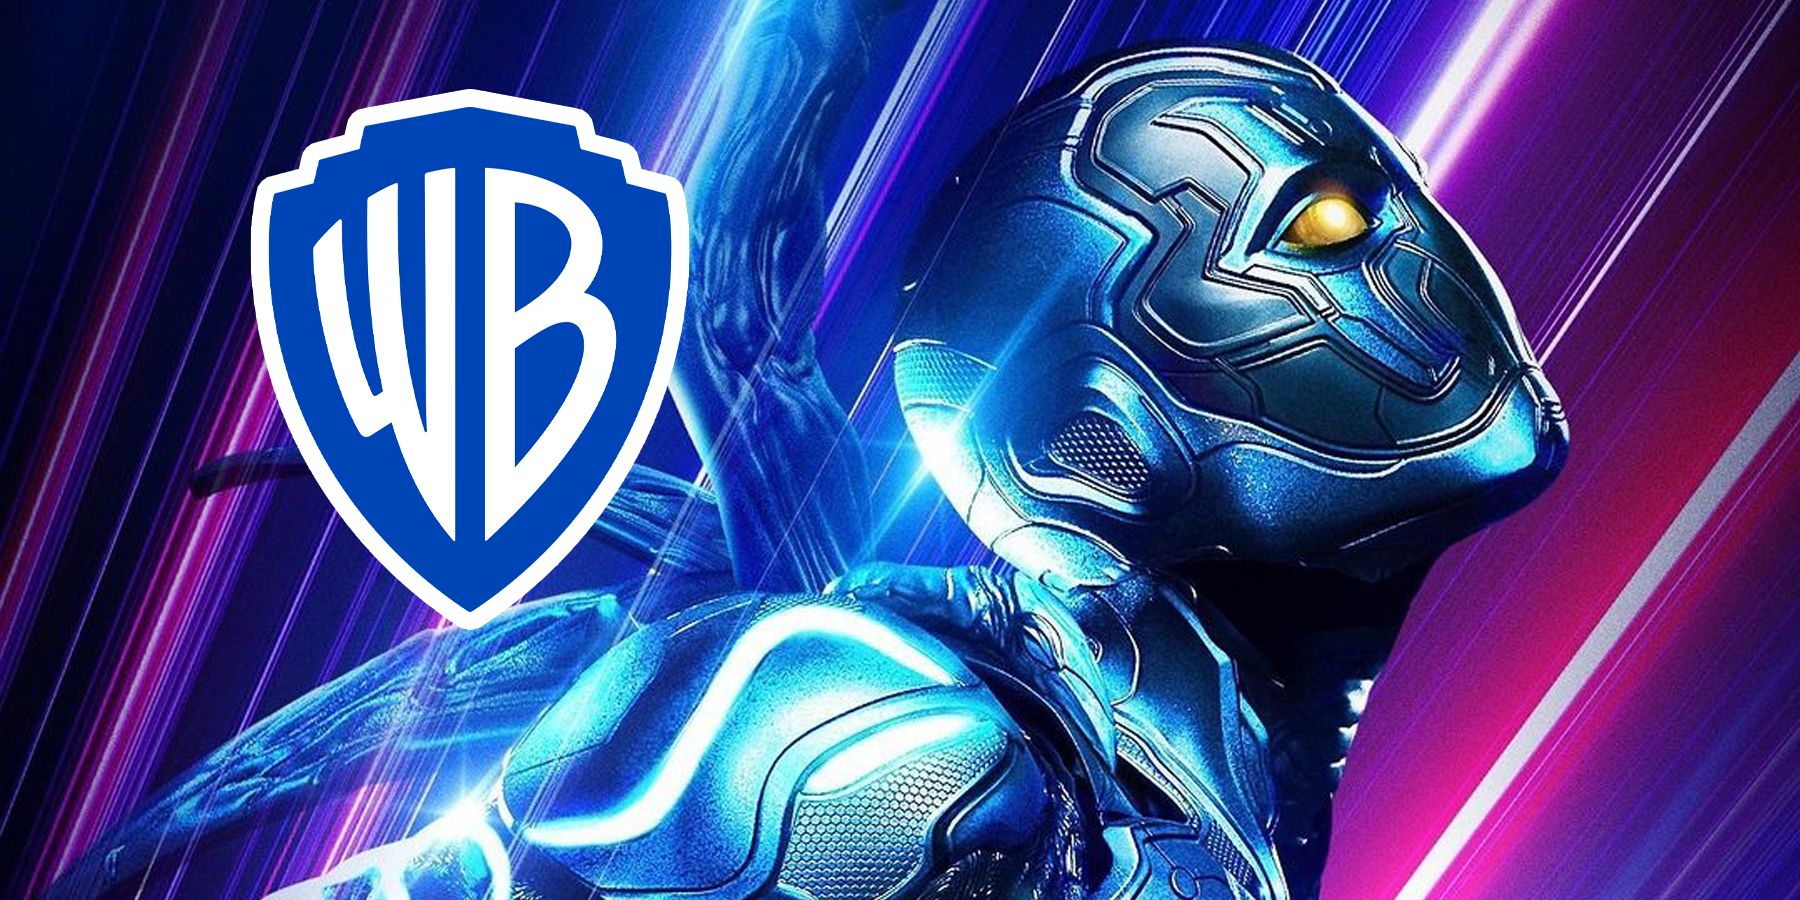 Warner Bros. Says Tropical Storm Hilary Had Significant Impact on BLUE  BEETLE Box Office Numbers — GeekTyrant